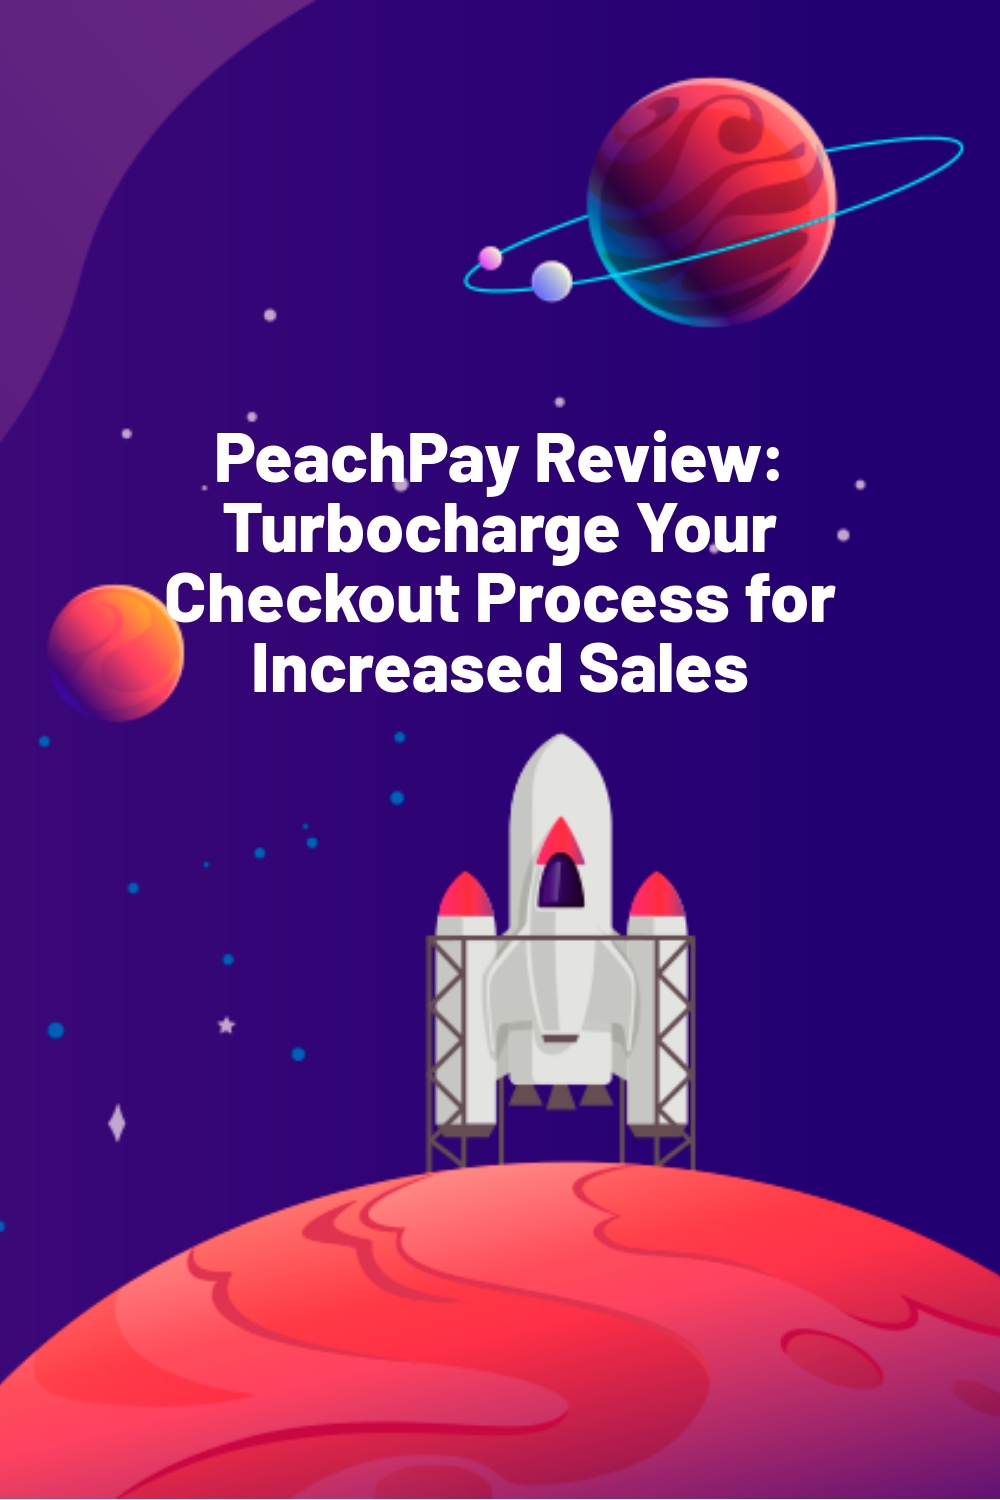 PeachPay Review: Turbocharge Your Checkout Process for Increased Sales